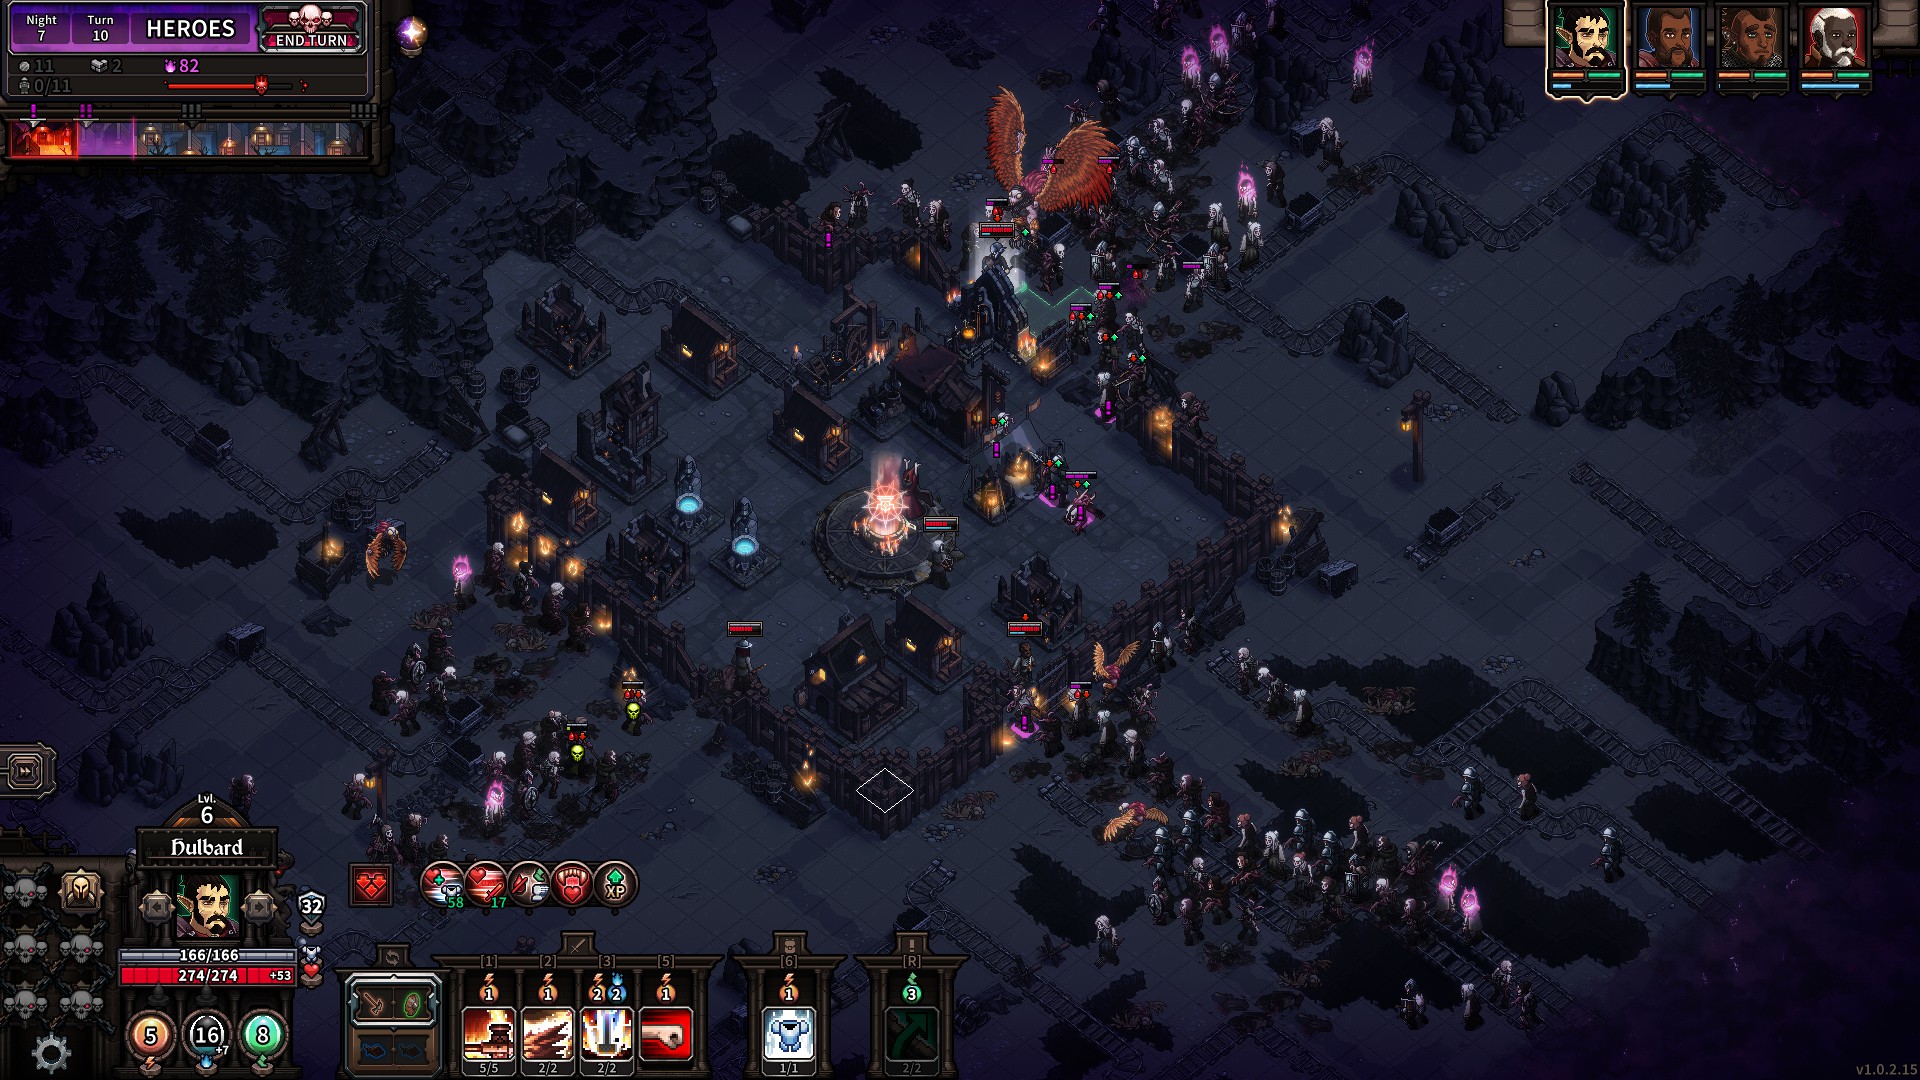 A settlement being overrun by monsters in The Last Spell.